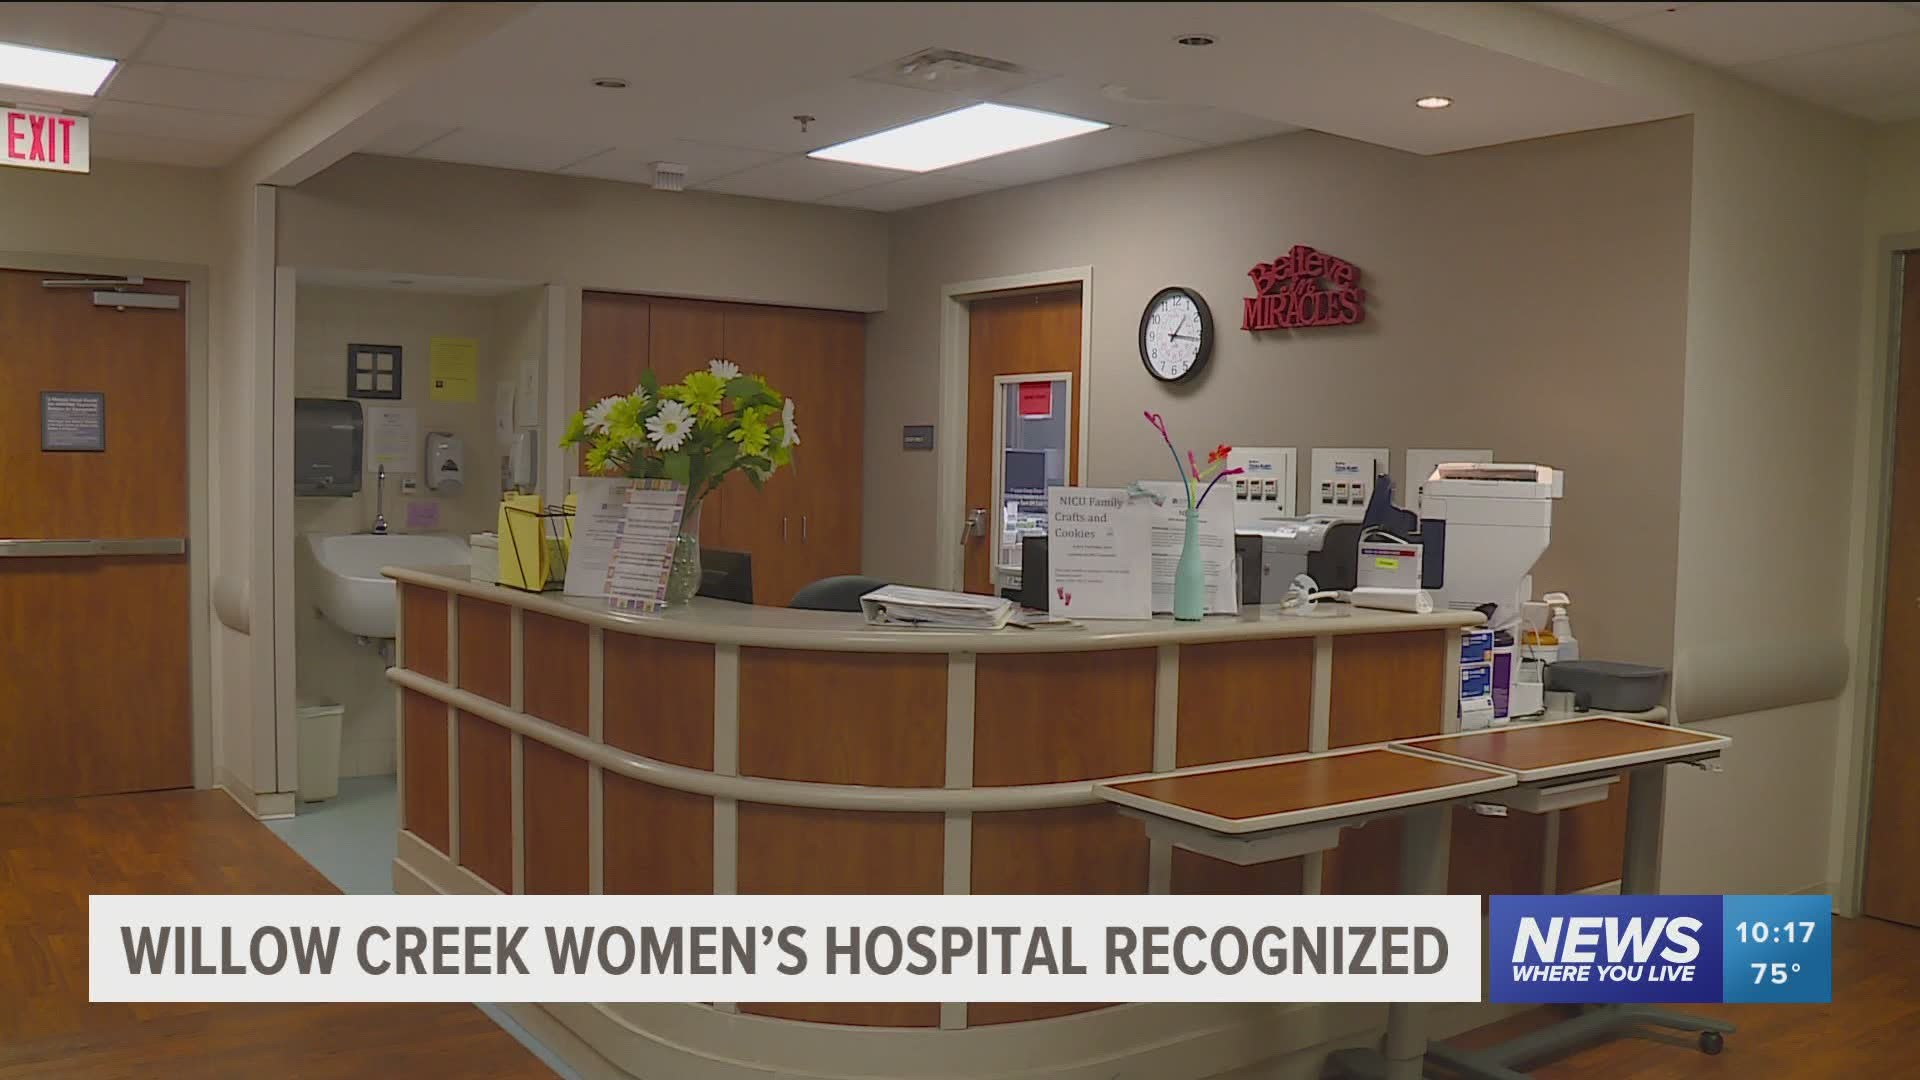 VBAC is an acronym for Vaginal Birth After Cesarean. It's the first hospital in the nation to earn this recognition. https://bit.ly/33Vp9Ew